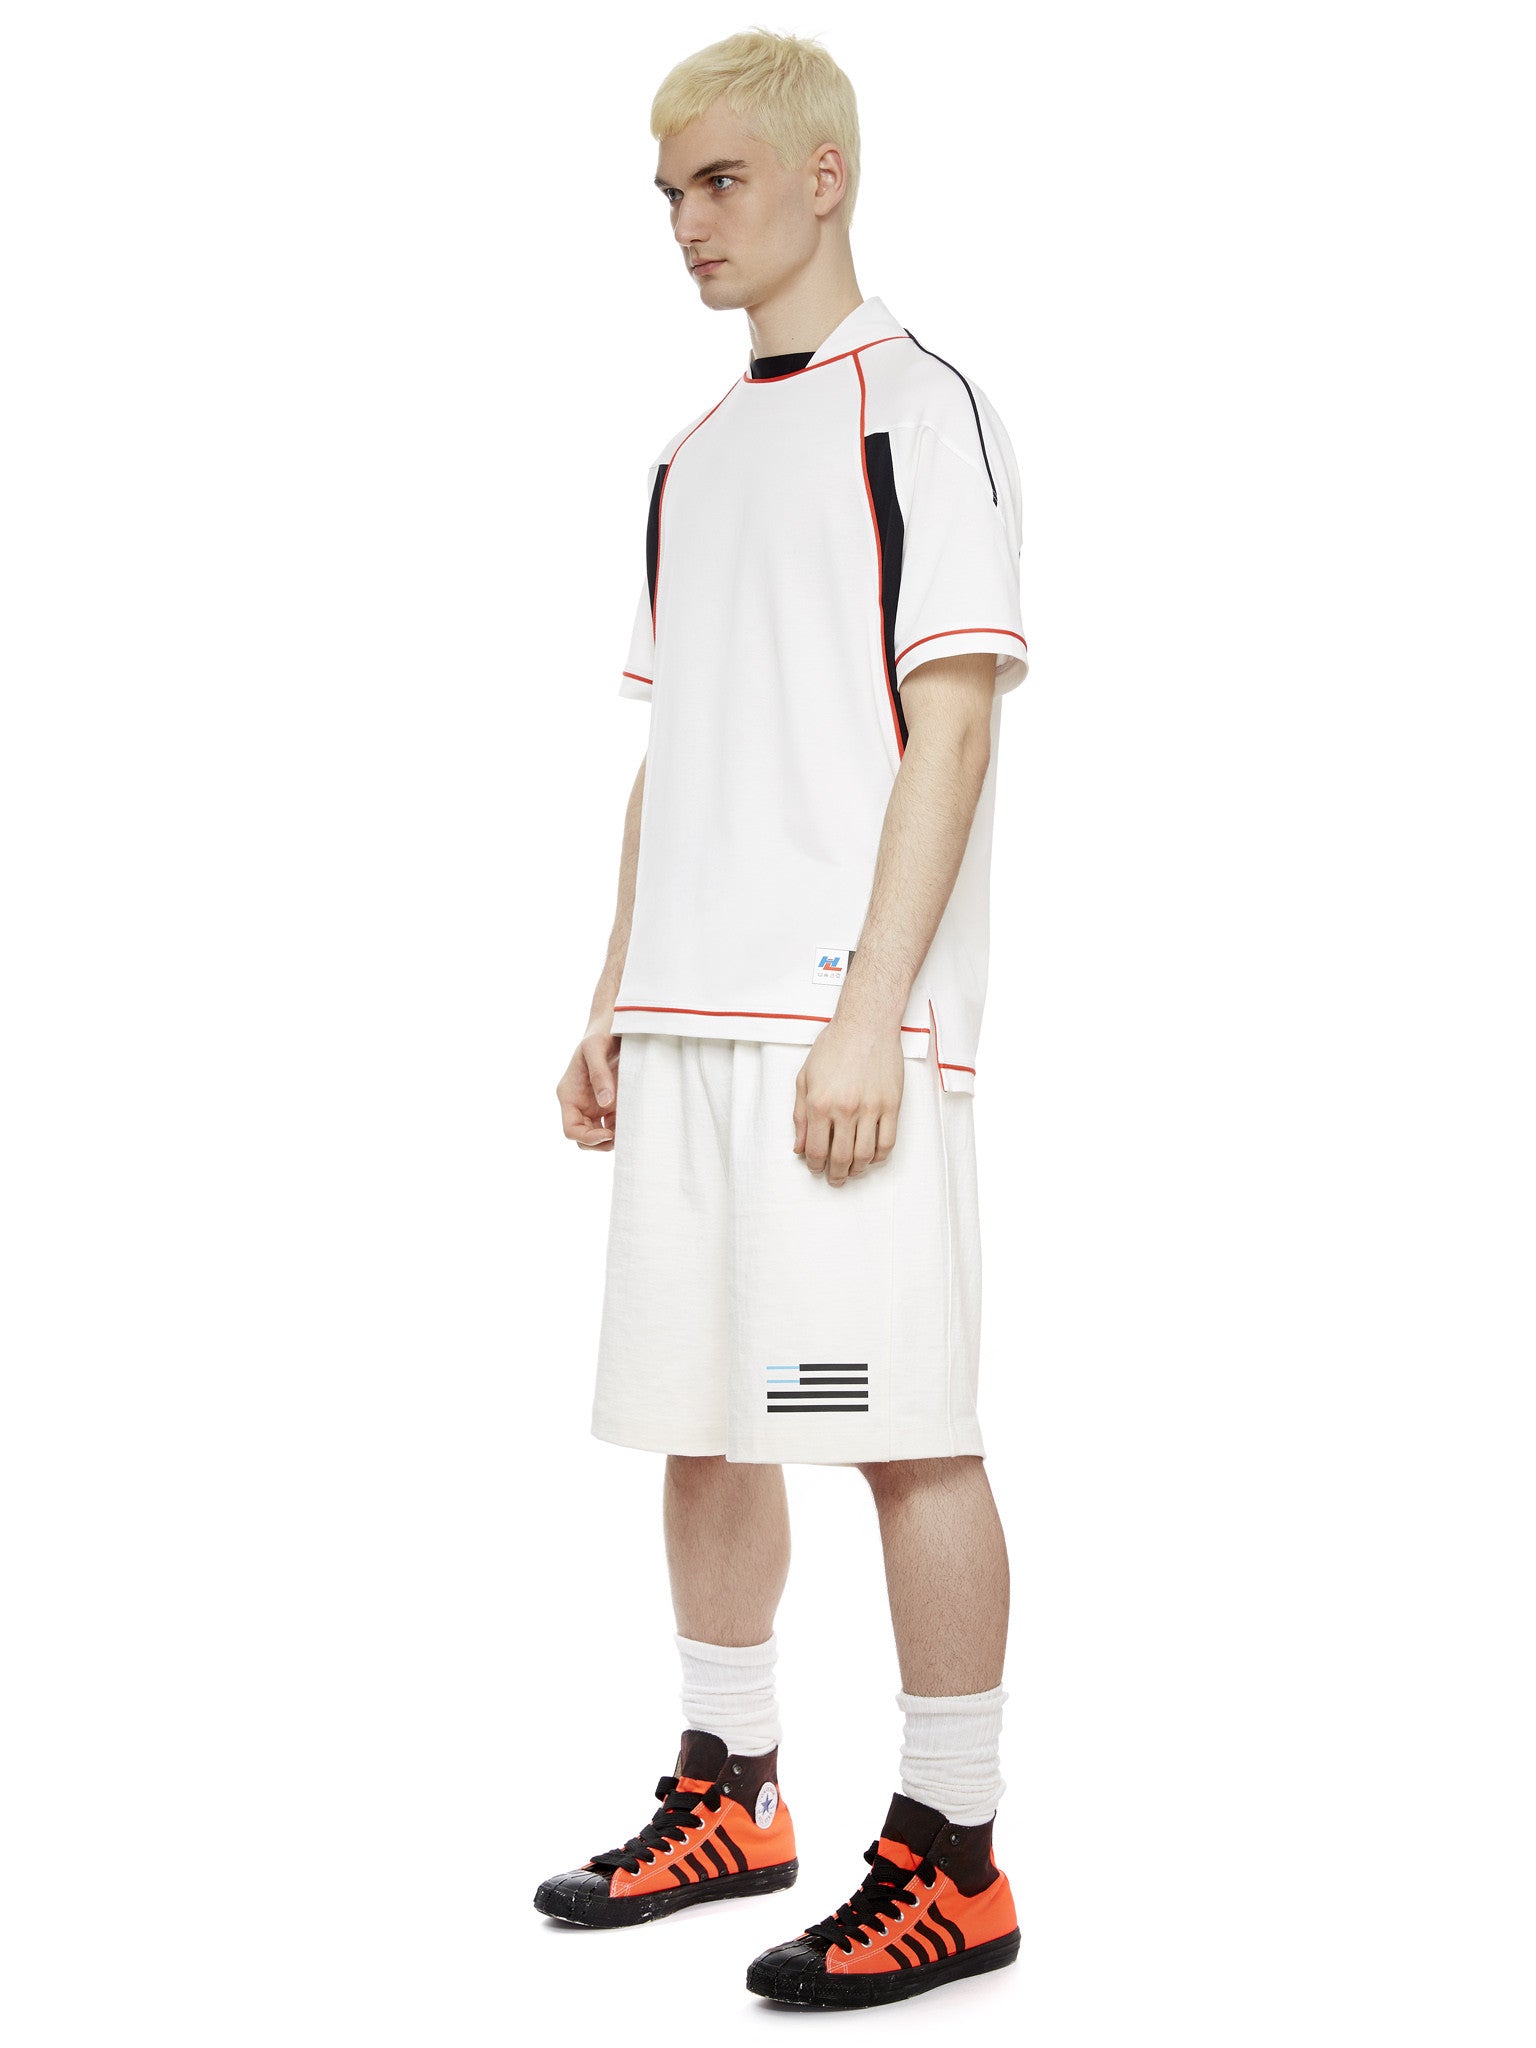 S/S Jersey in White